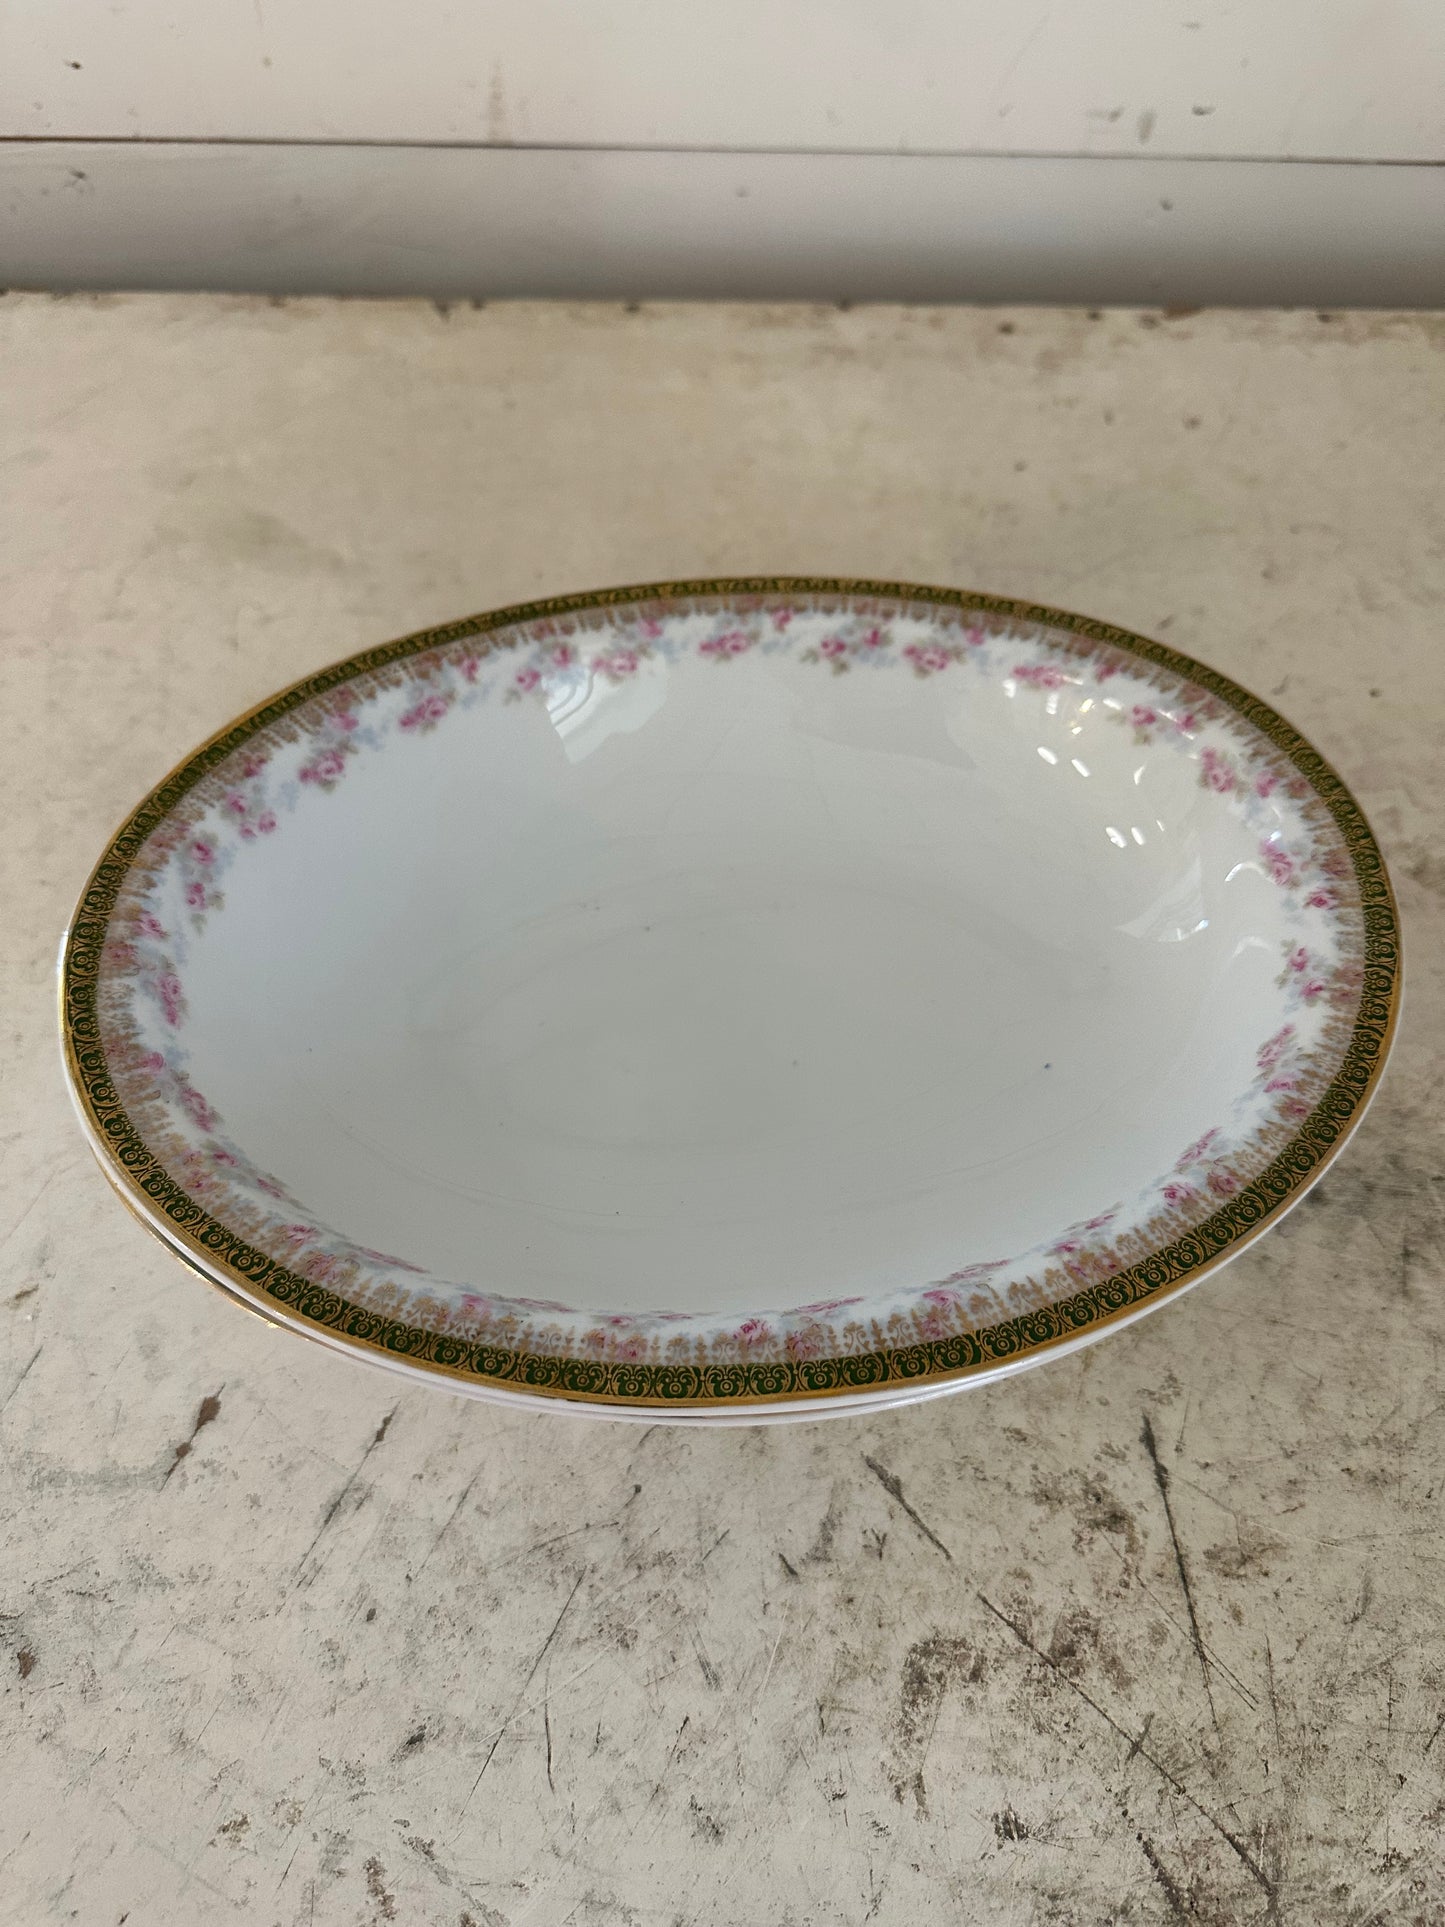 Beautiful Oval Serving Bowl - sold individually